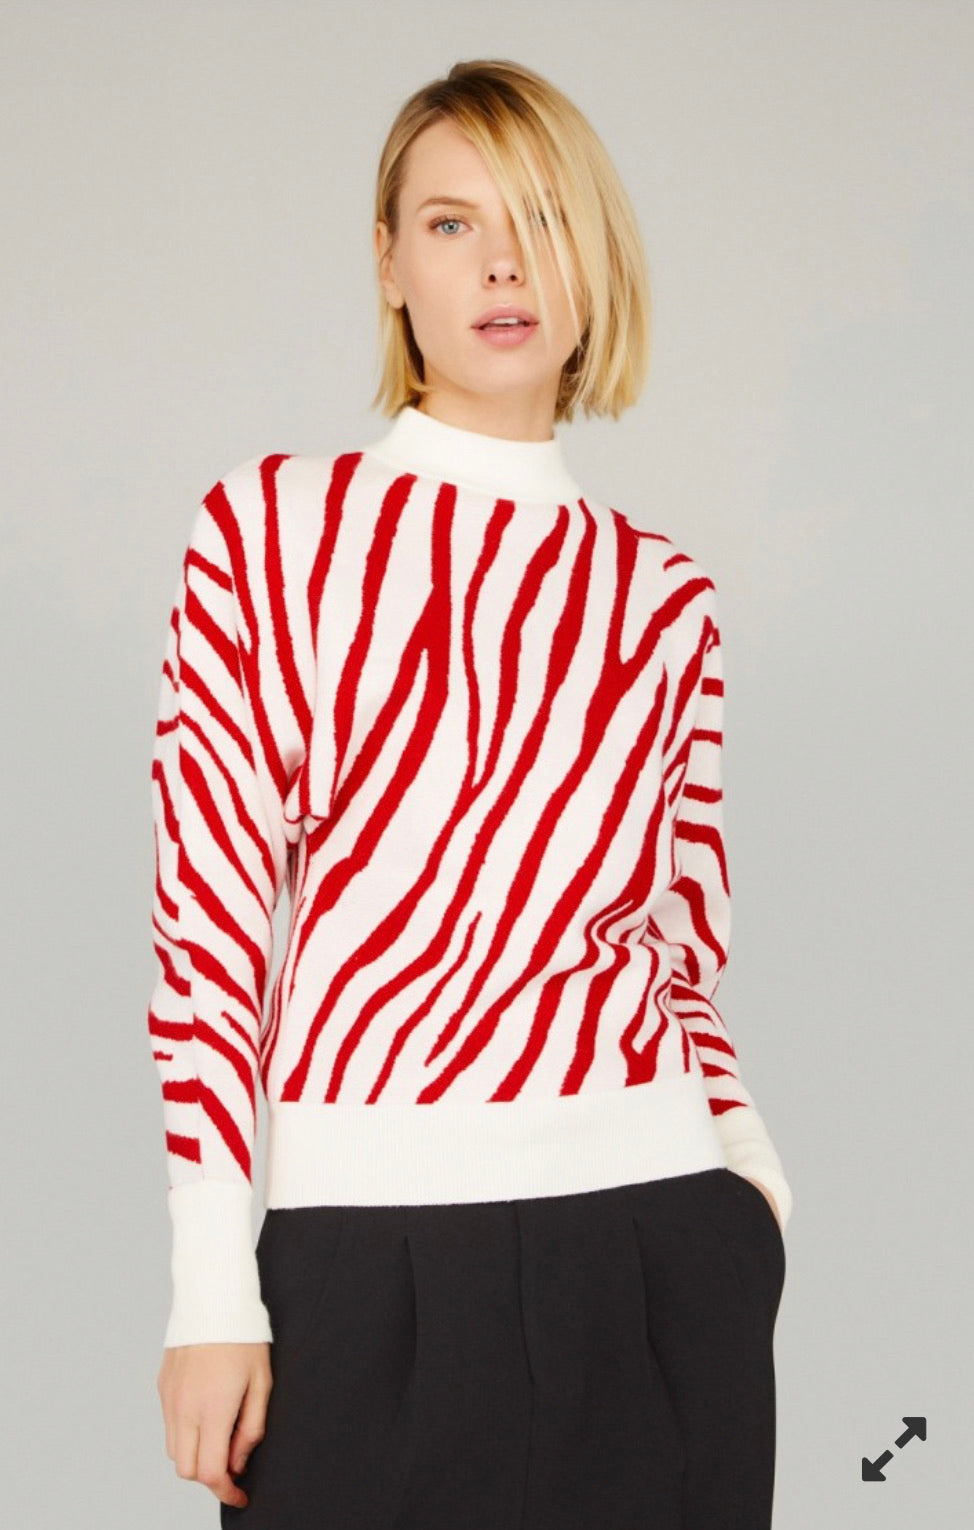 red tiger sweater